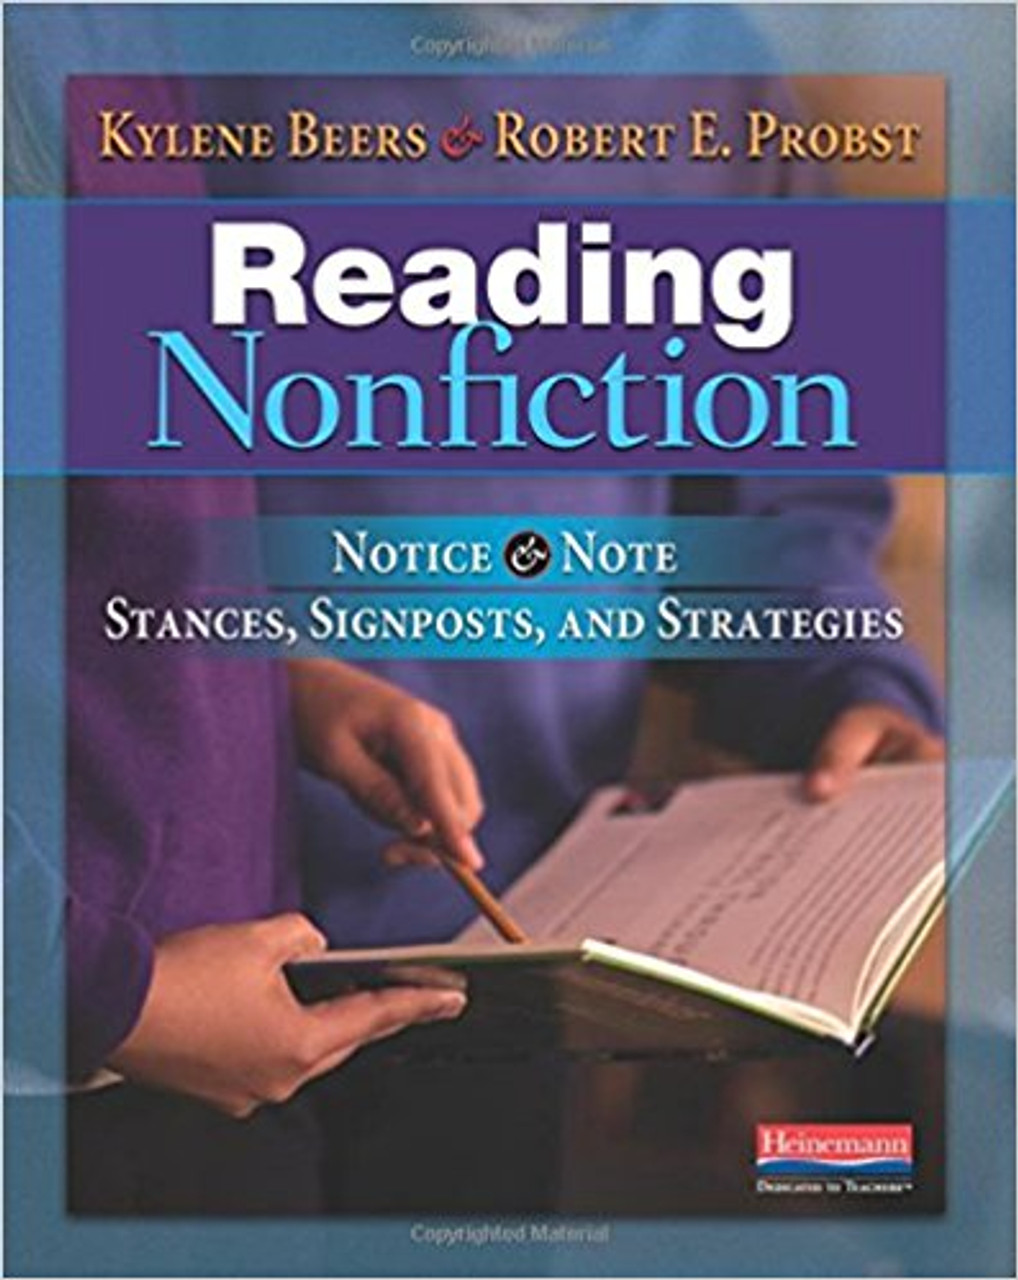 Reading Nonfiction: Notice & Note Stances, Signposts, and Strategies by Kylene Beers